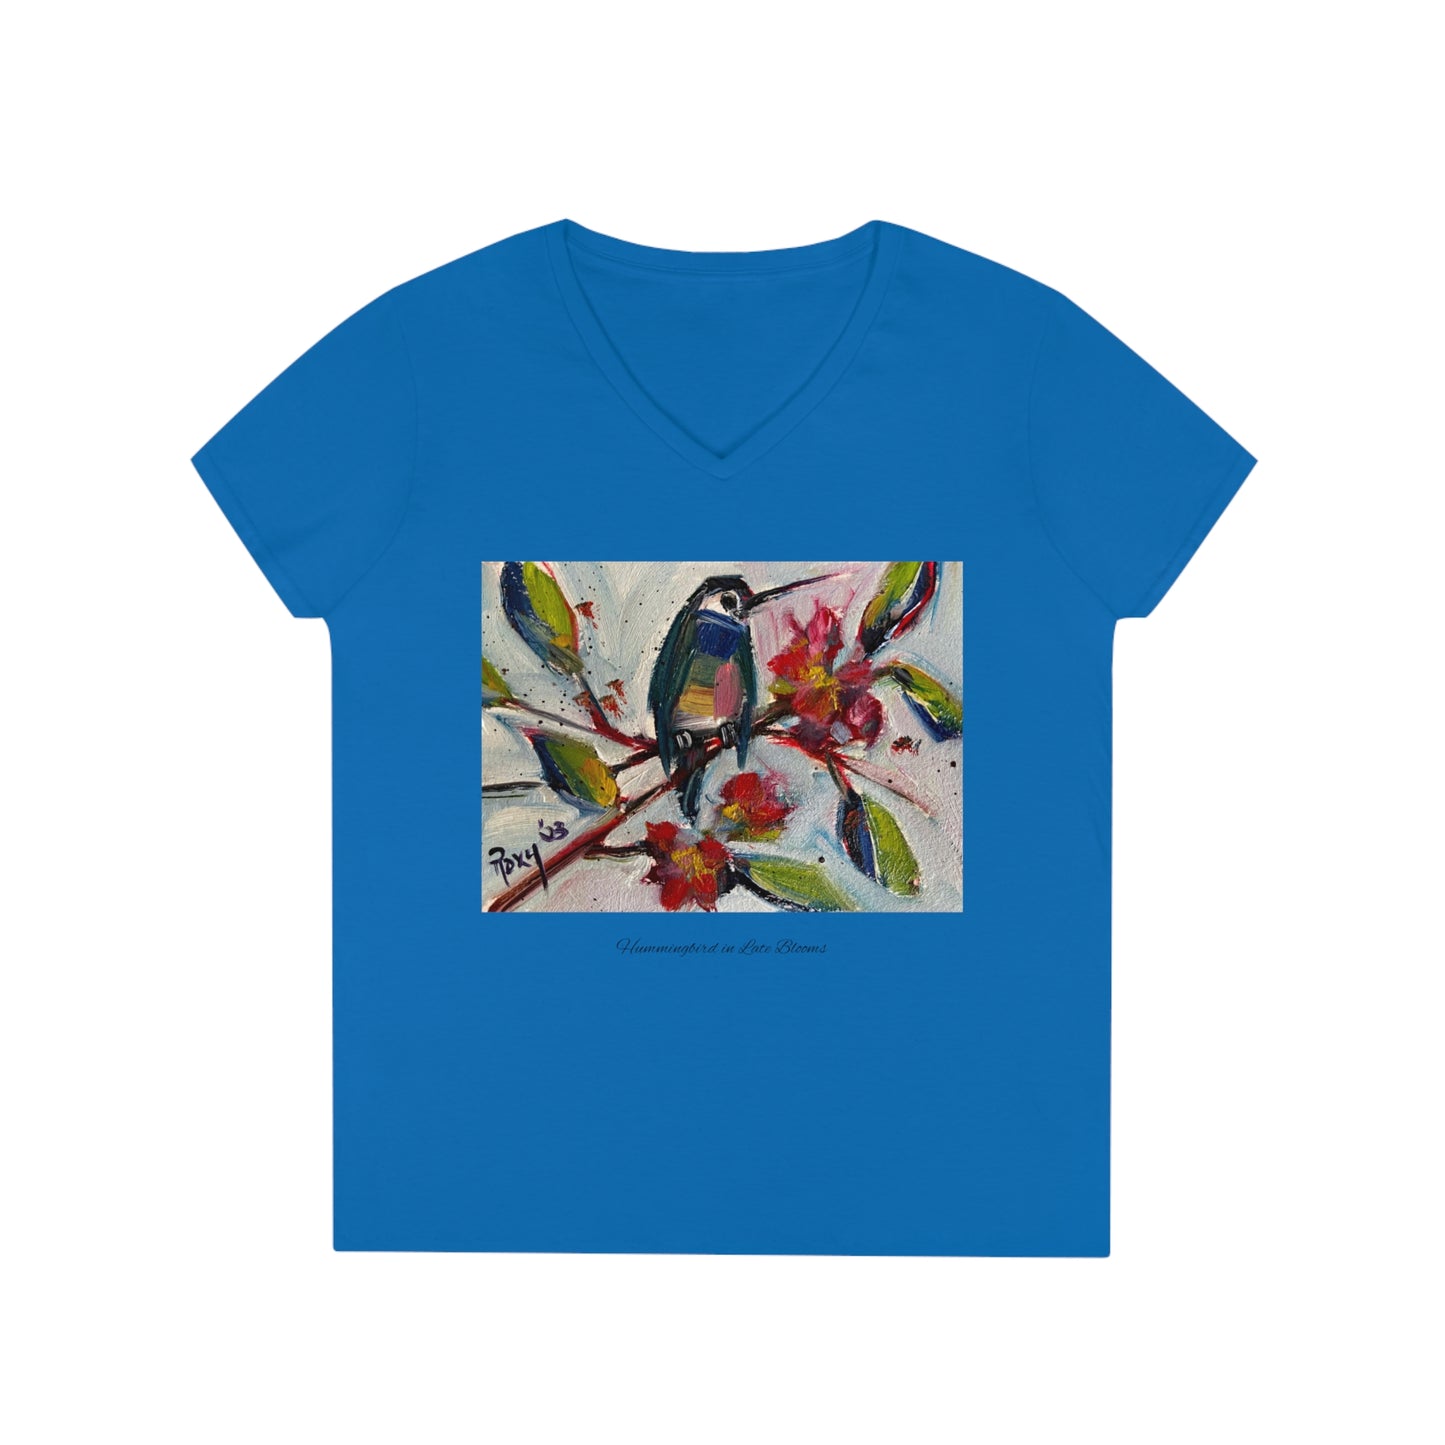 Hummingbird in Late Blooms Ladies' V-Neck T-Shirt